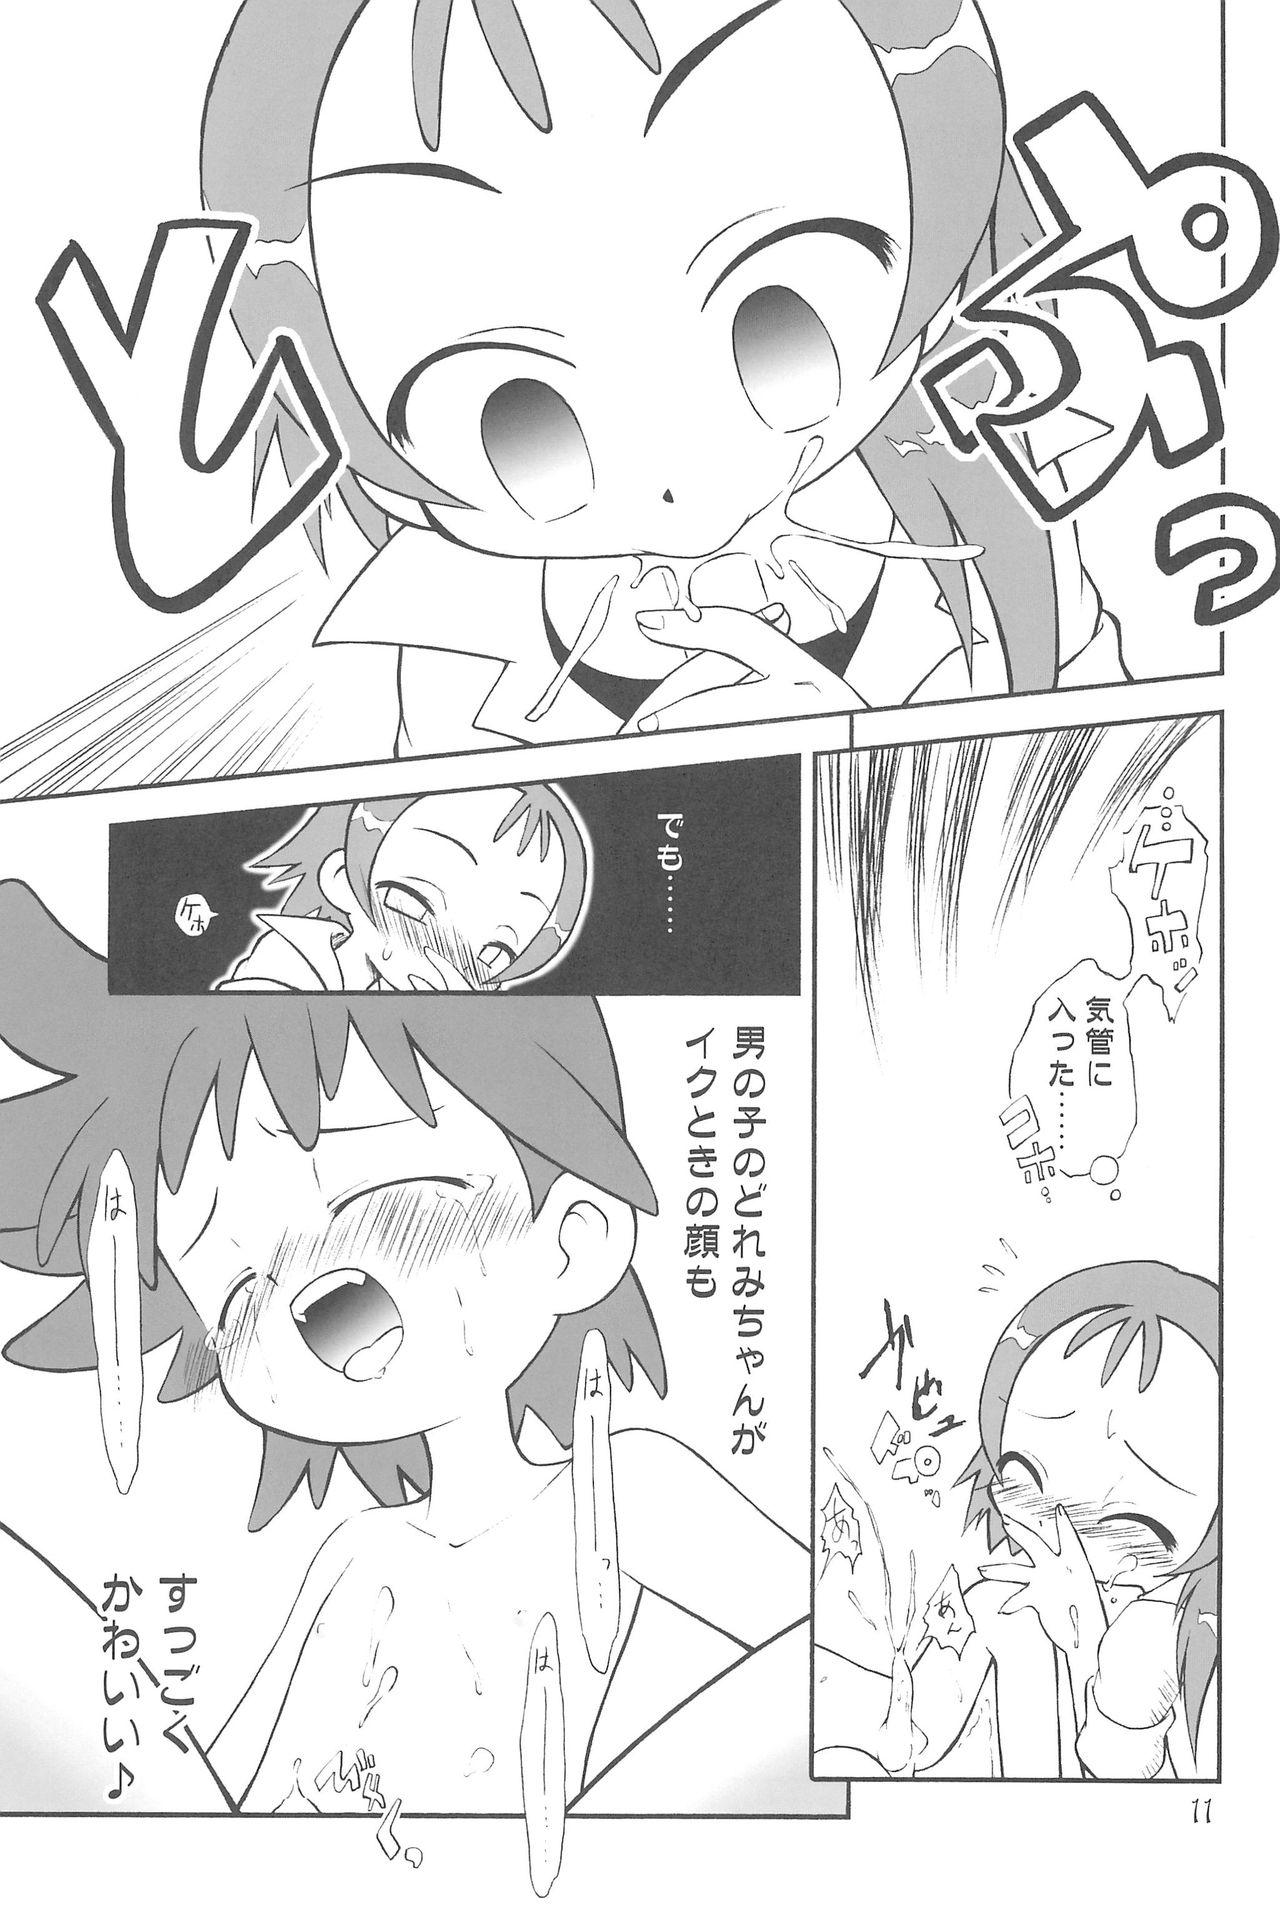 Sexteen Witch’s Song Plus - Ojamajo doremi France - Page 11